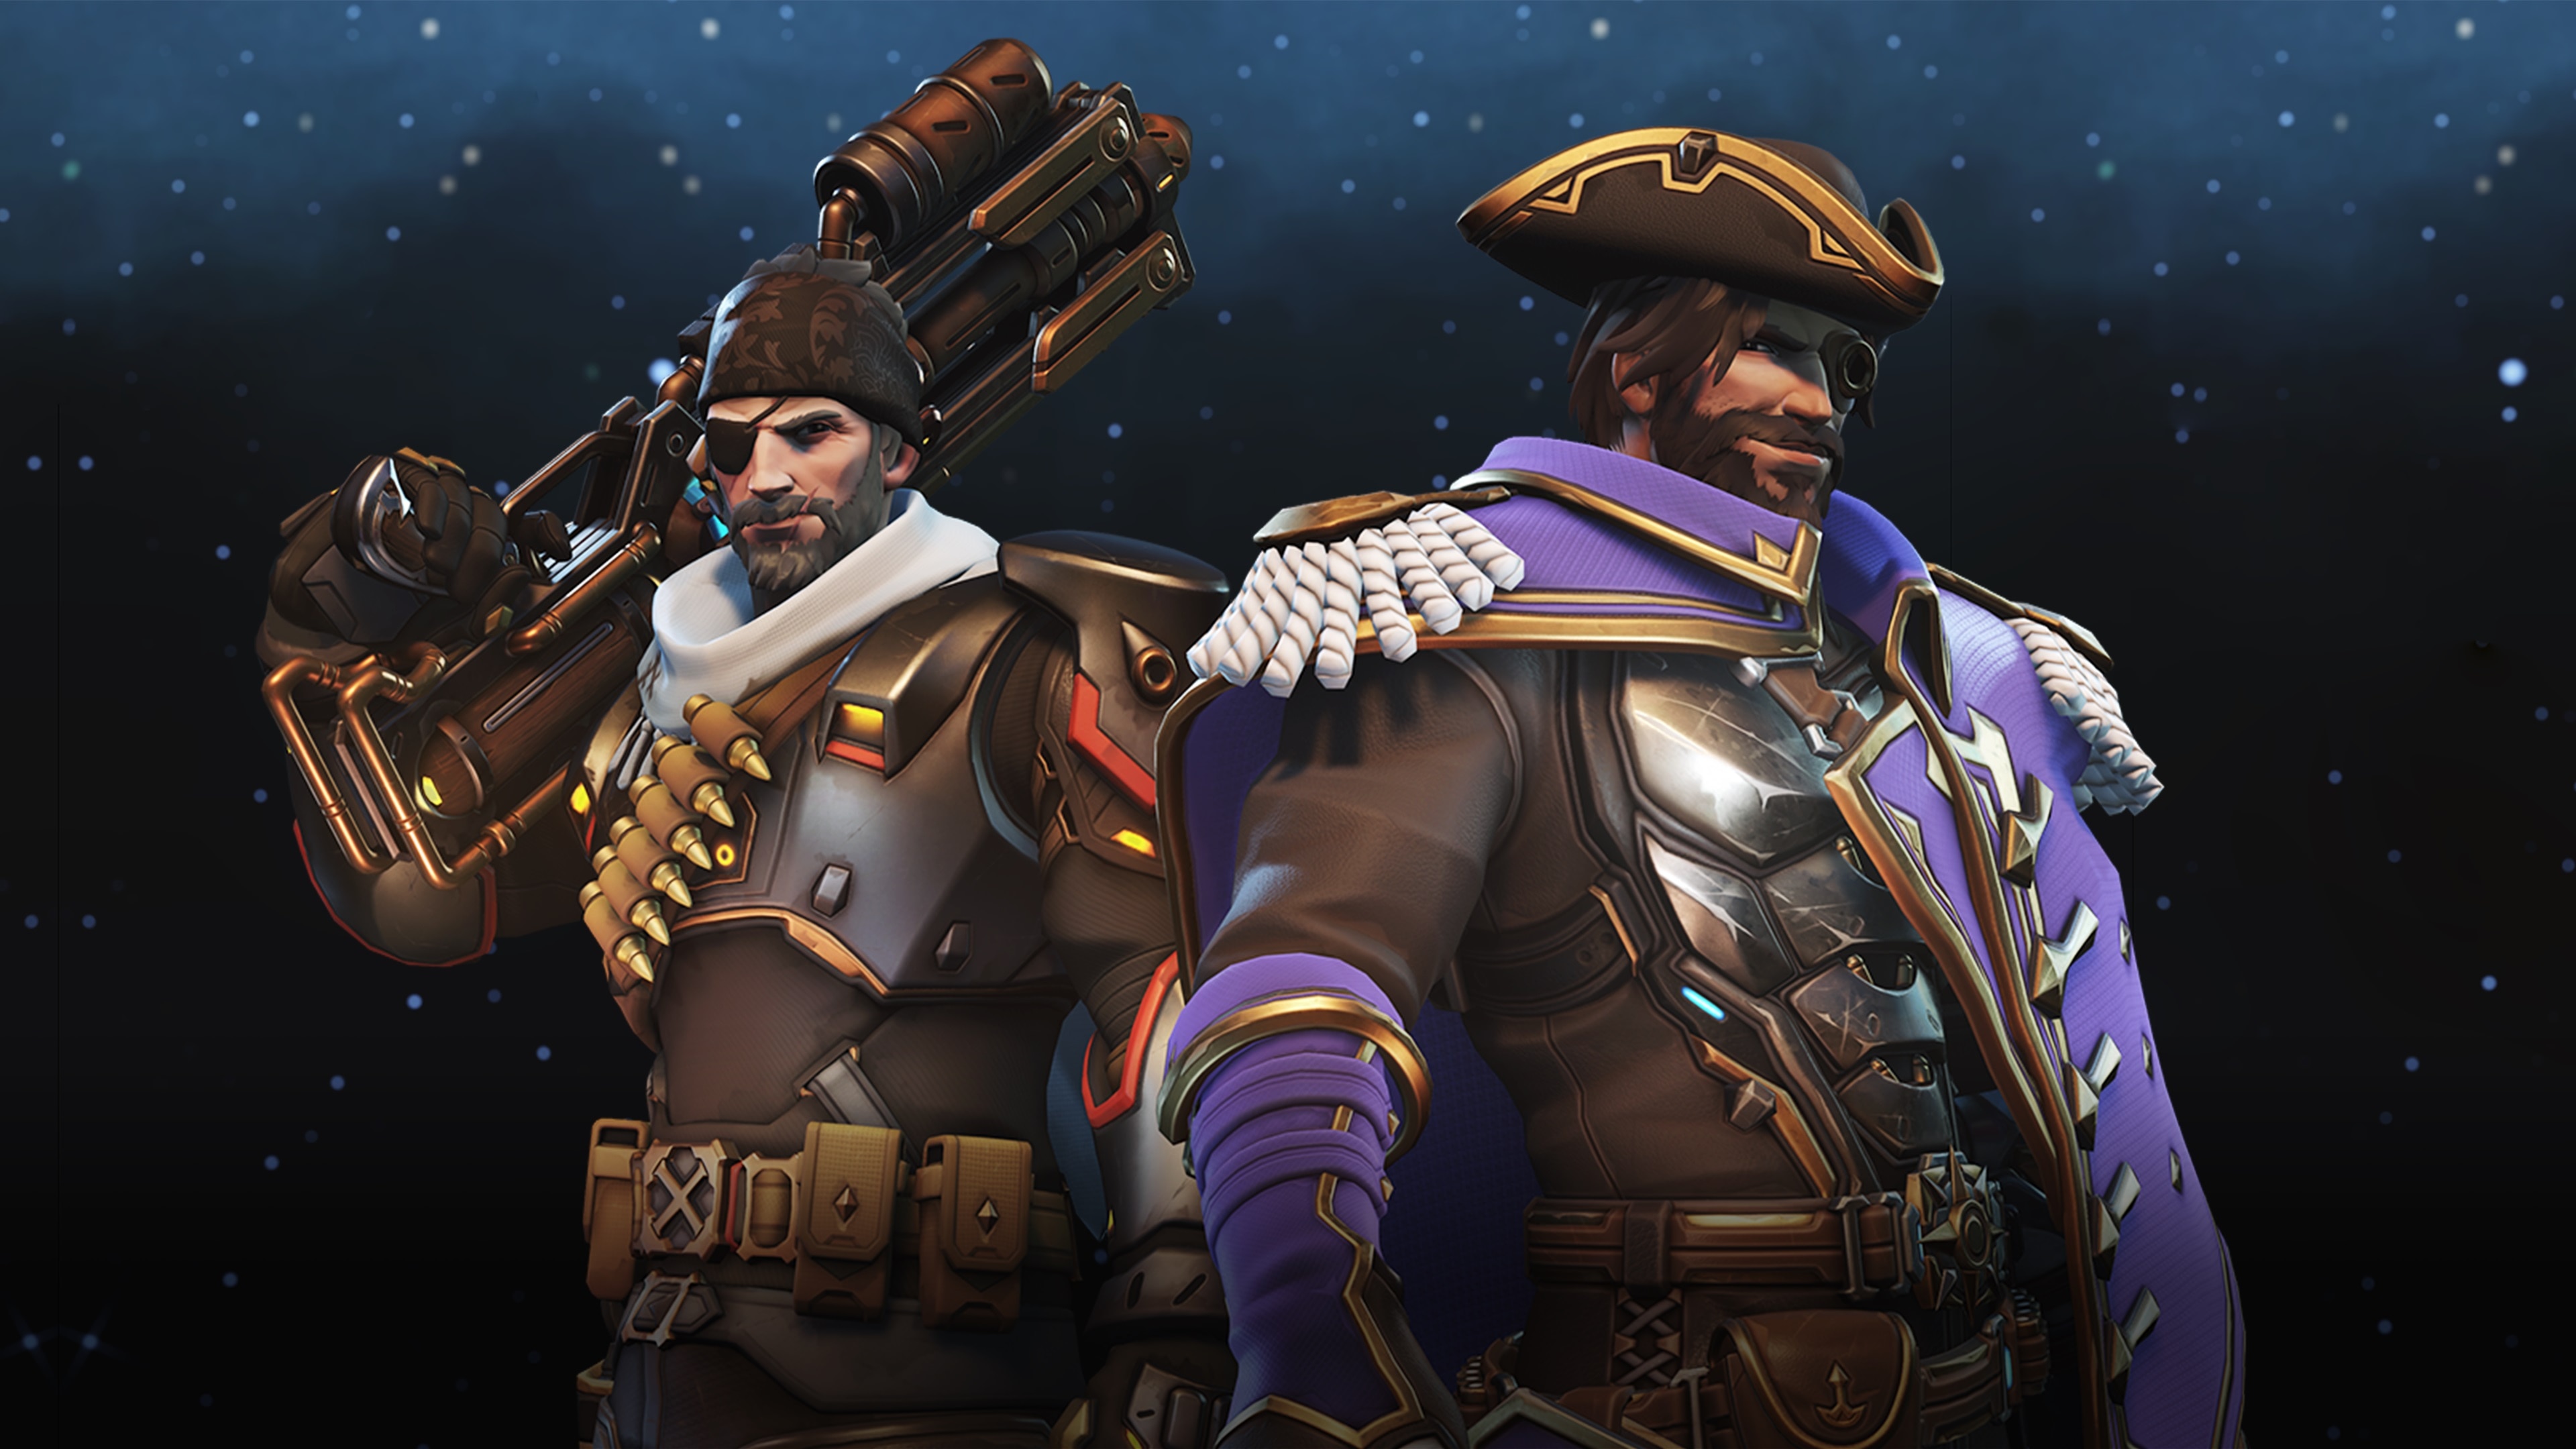 Soldier: 76 and Cassidy in their respective Space Raider skins, against a starry background, in artwork for Overwatch 2’s Watchpoint Pack